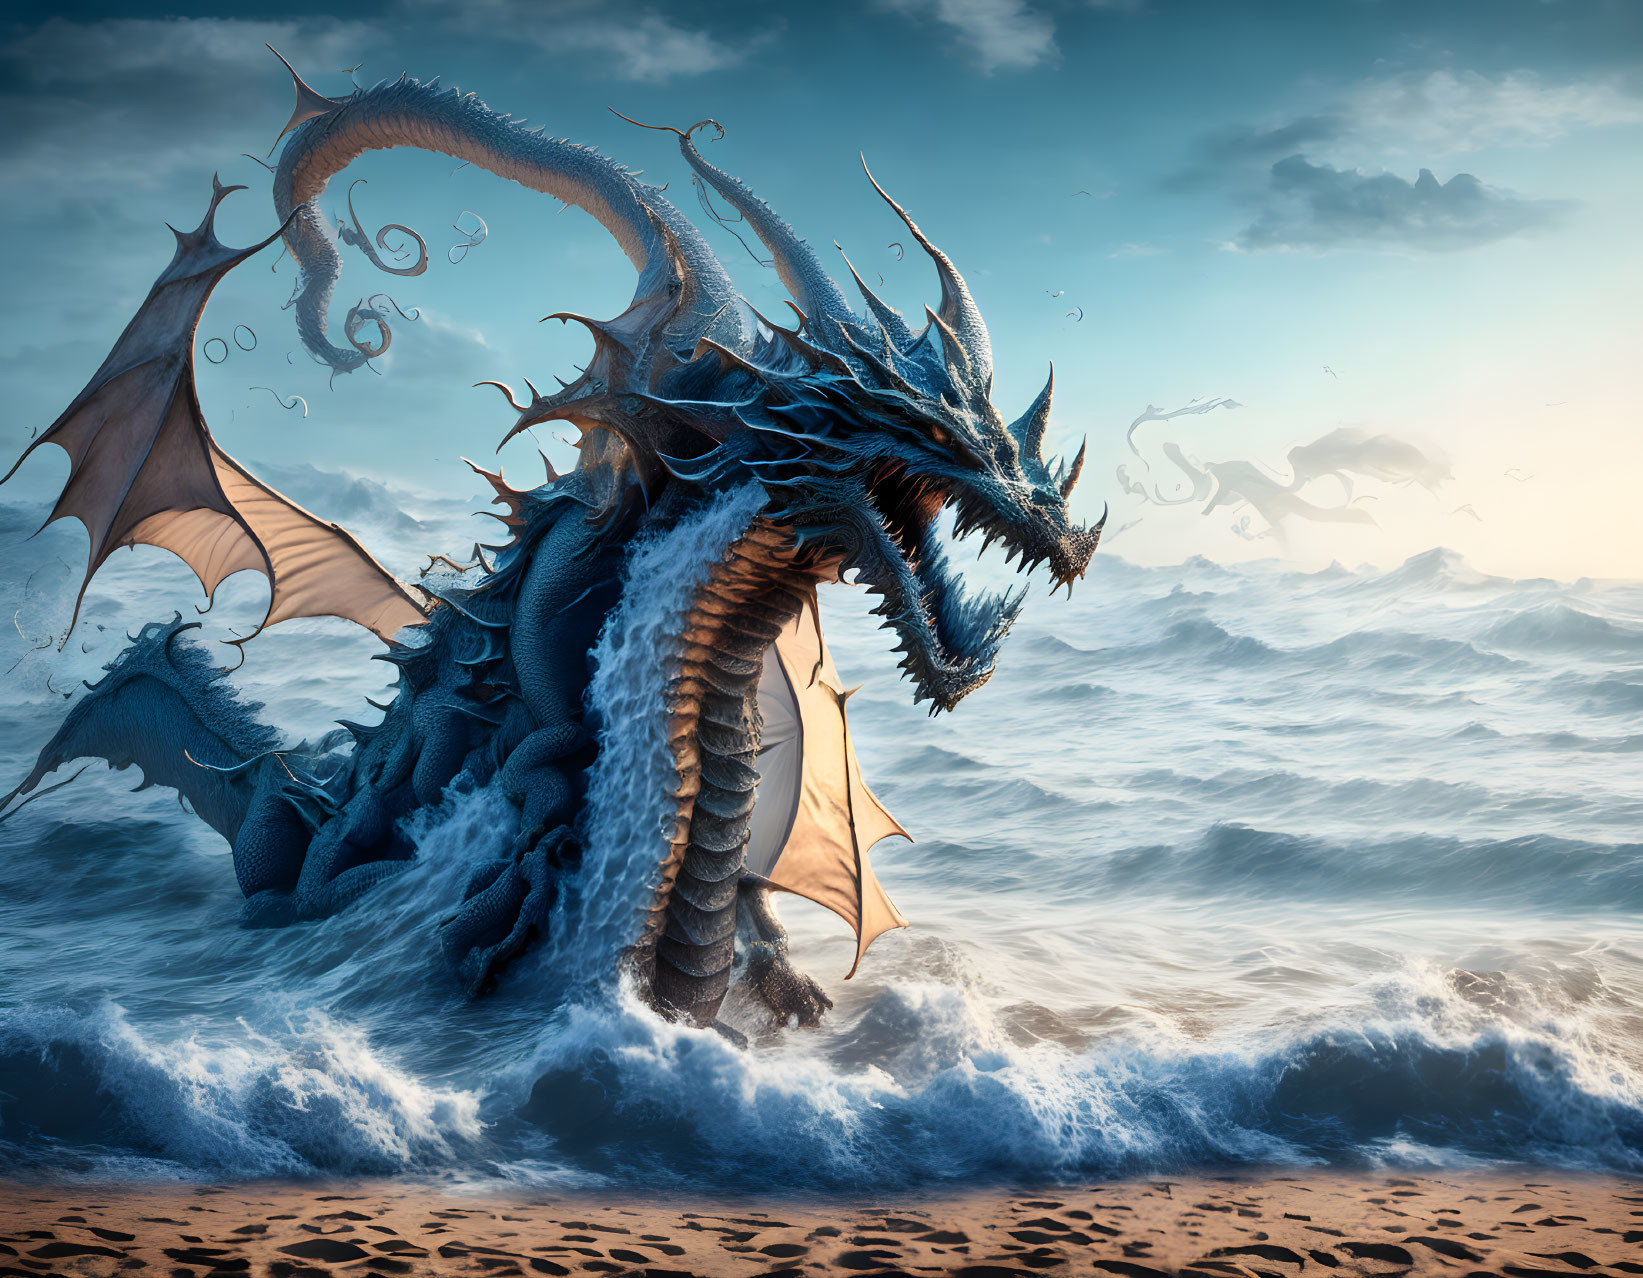 Blue dragon with long horns and expansive wings by stormy seaside